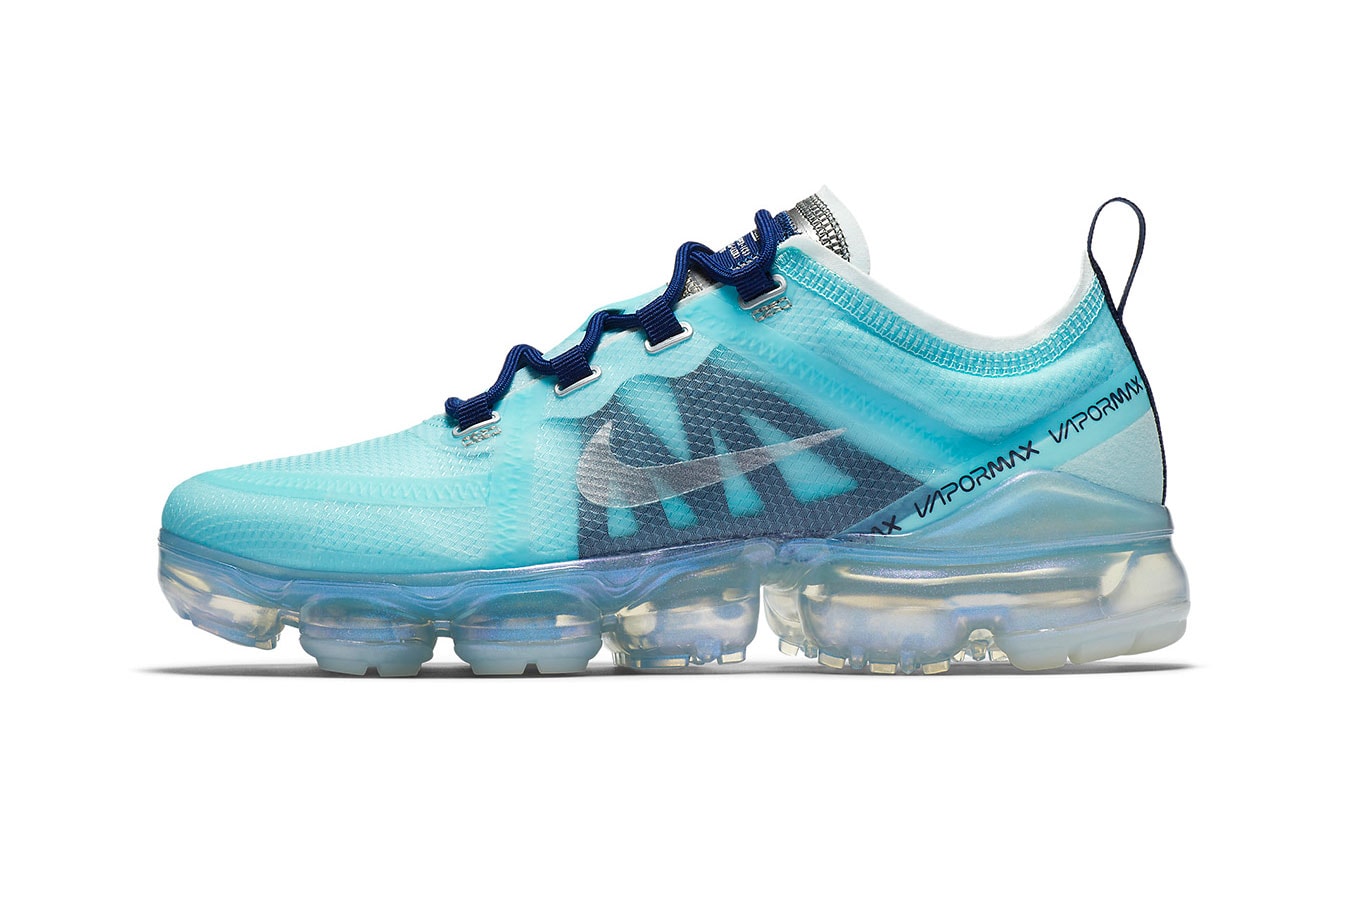  Nike Air VaporMax 2019 "Teal Tint/Blue Void" release date info price womens colorway sneaker purchase stockist nike.com Color: Teal Tint/Blue Void/Spruce Fog/Teal Tint Style Code: AR6632-300